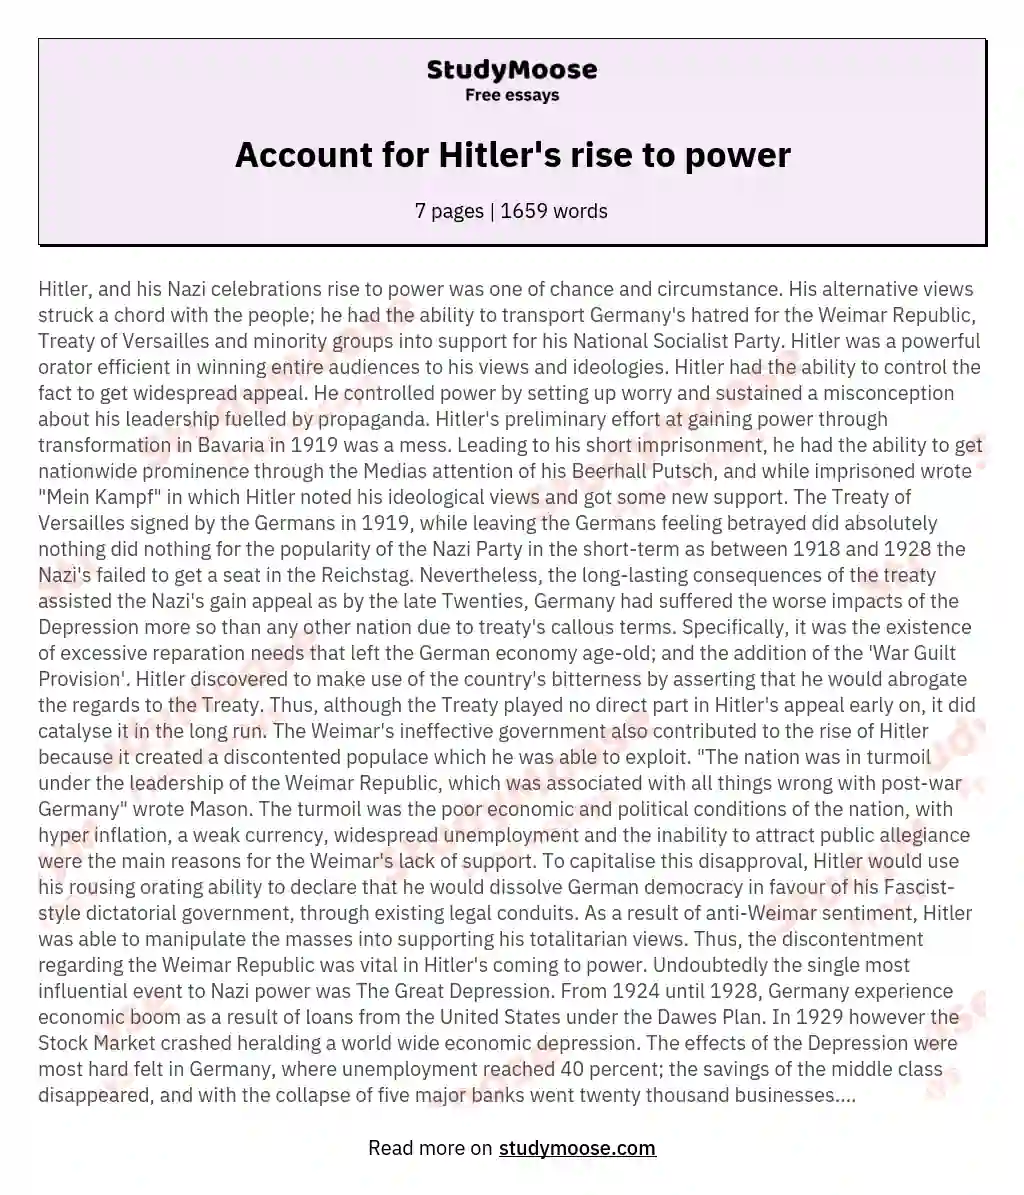 Account for Hitler's rise to power essay